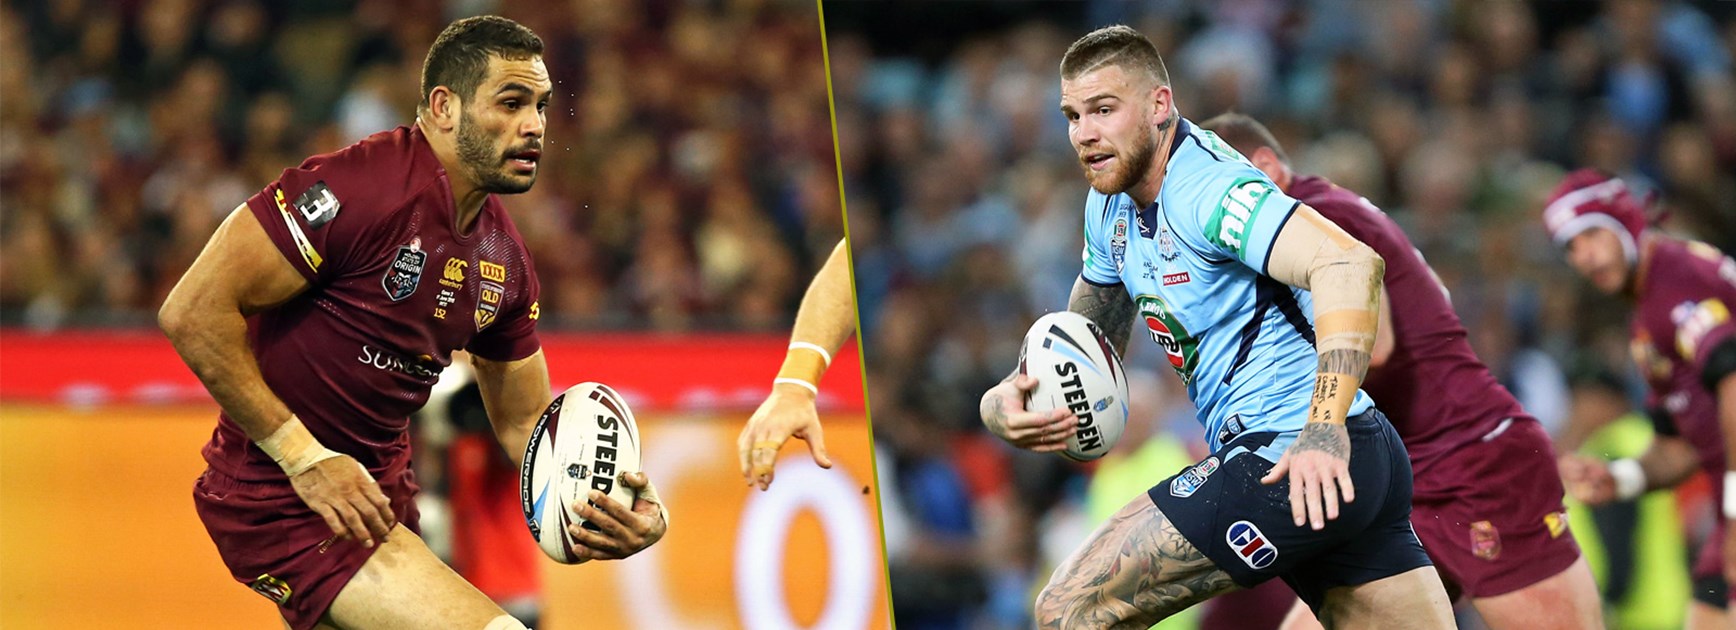 Last season they both lined up in the centres but in this year's Origin decider Greg Inglis and Josh Dugan will be key factors at fullback.